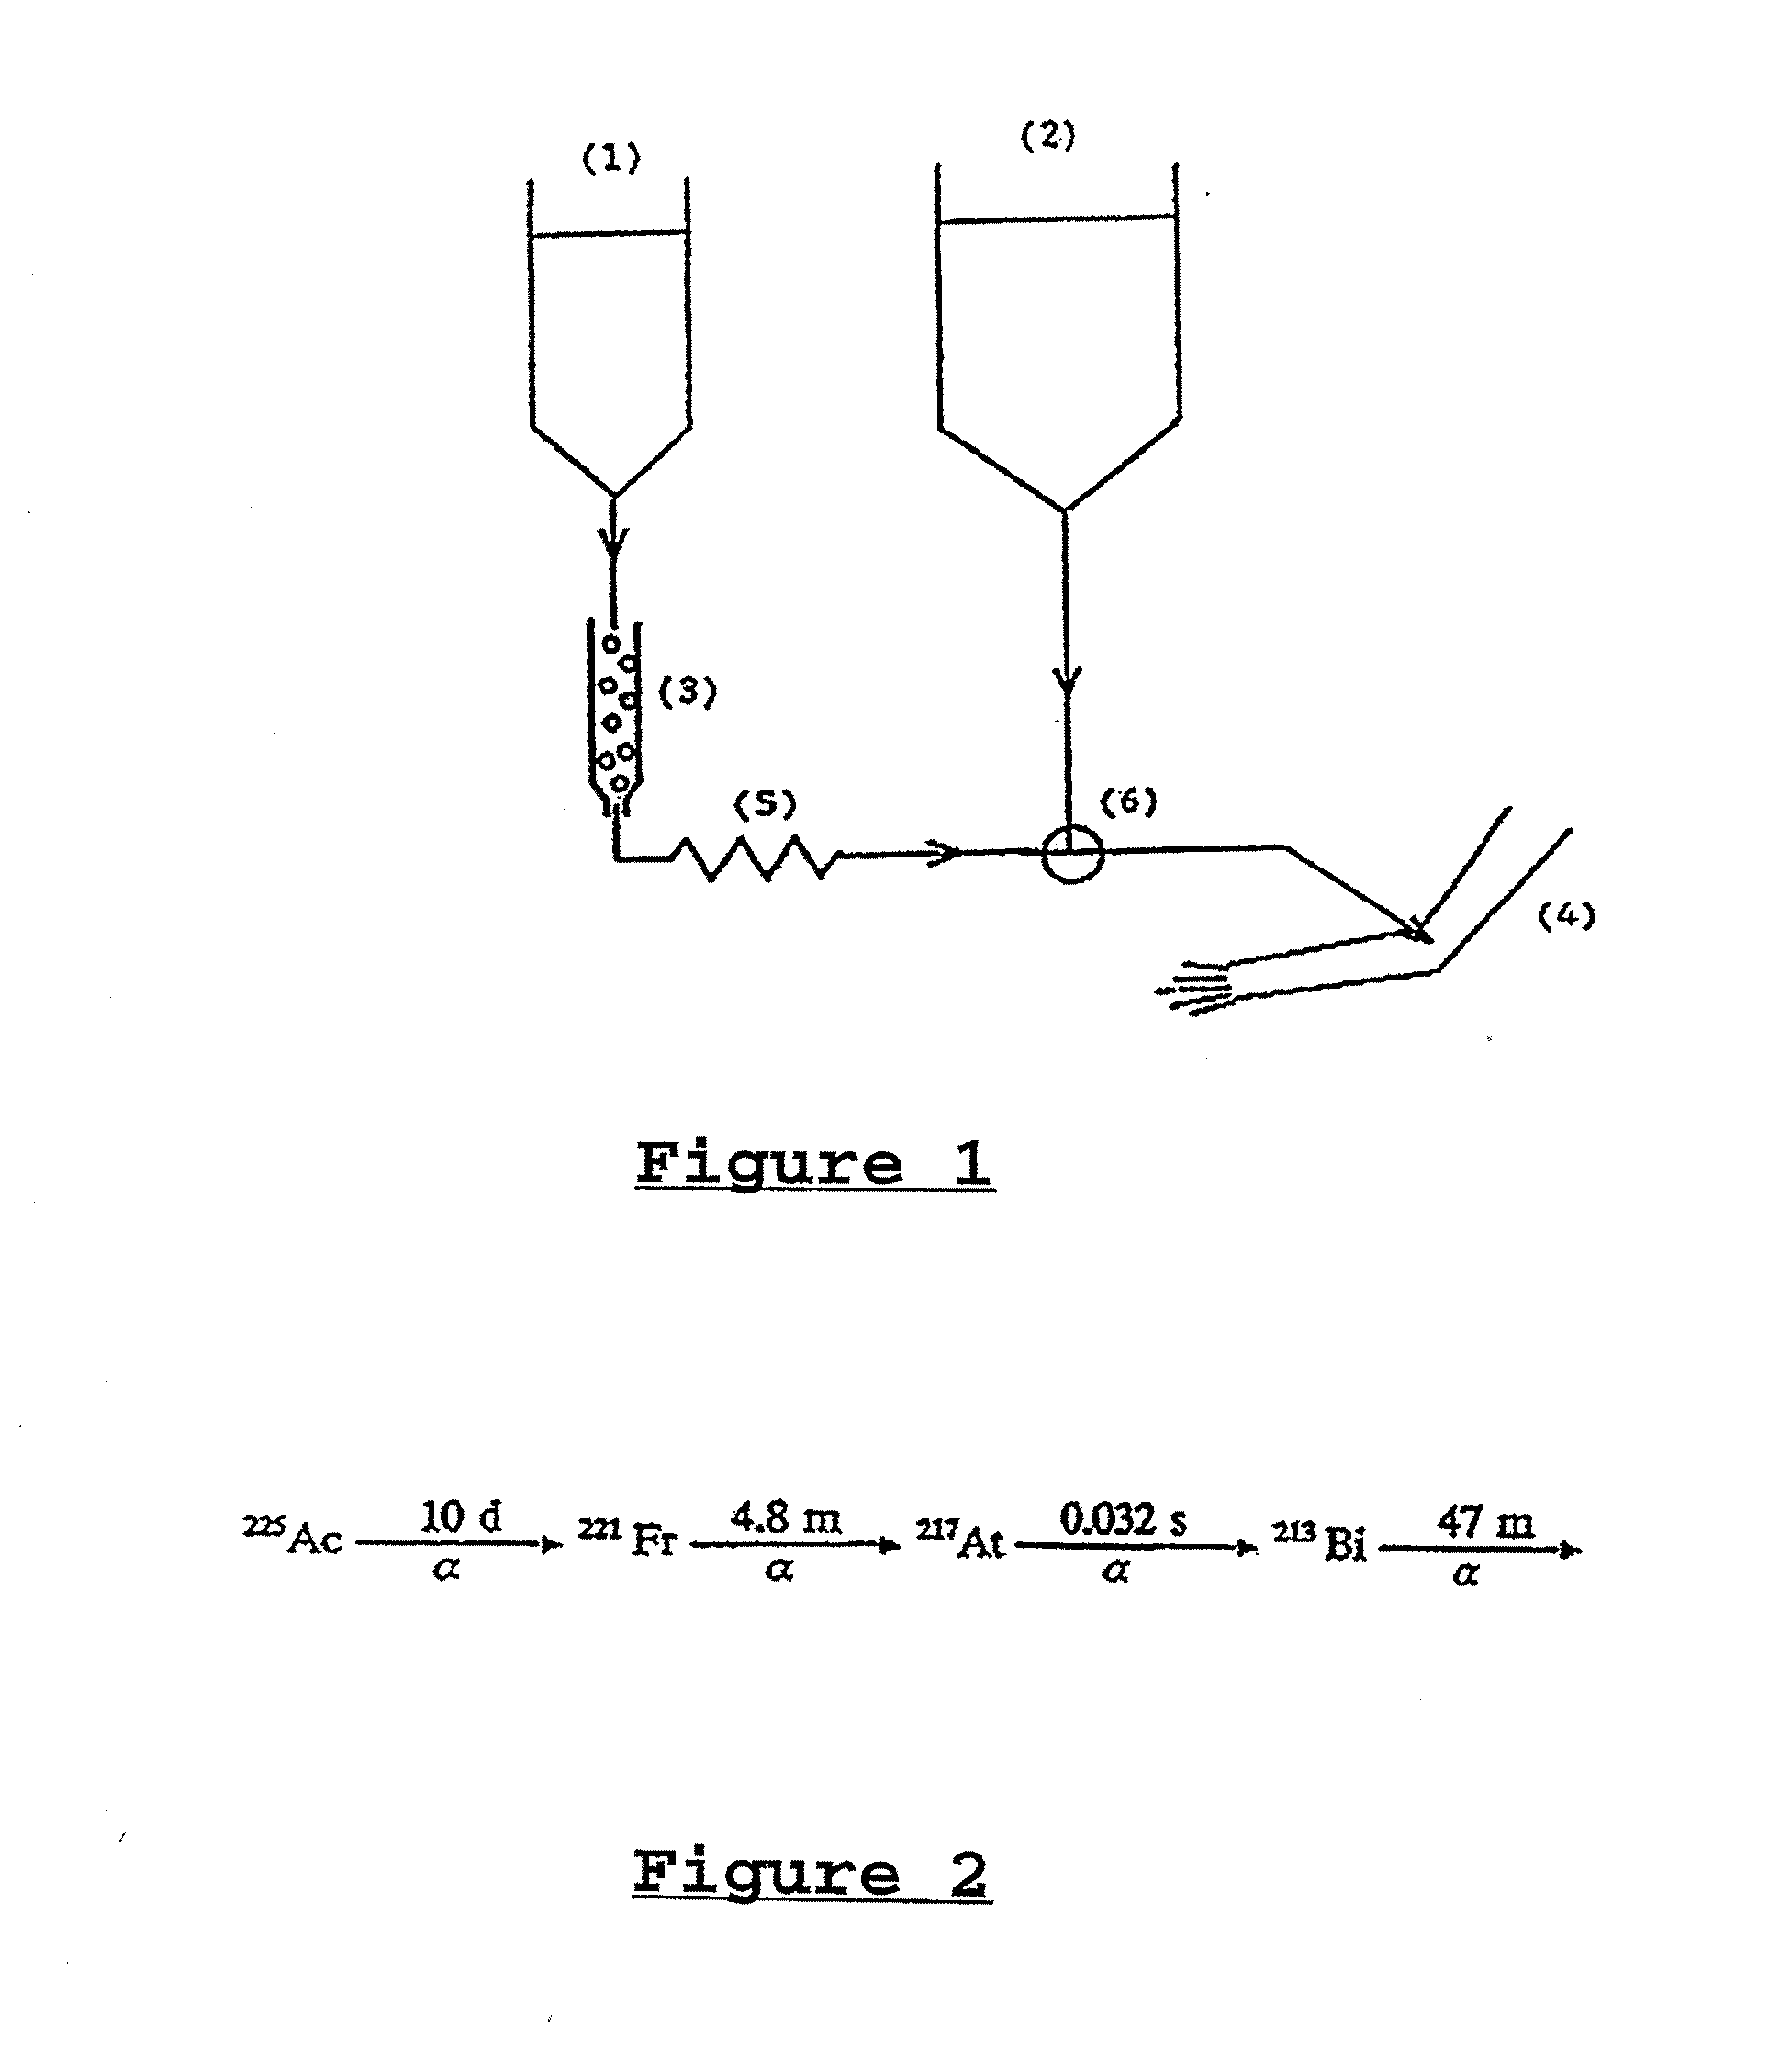 Methods for detecting pathological sites